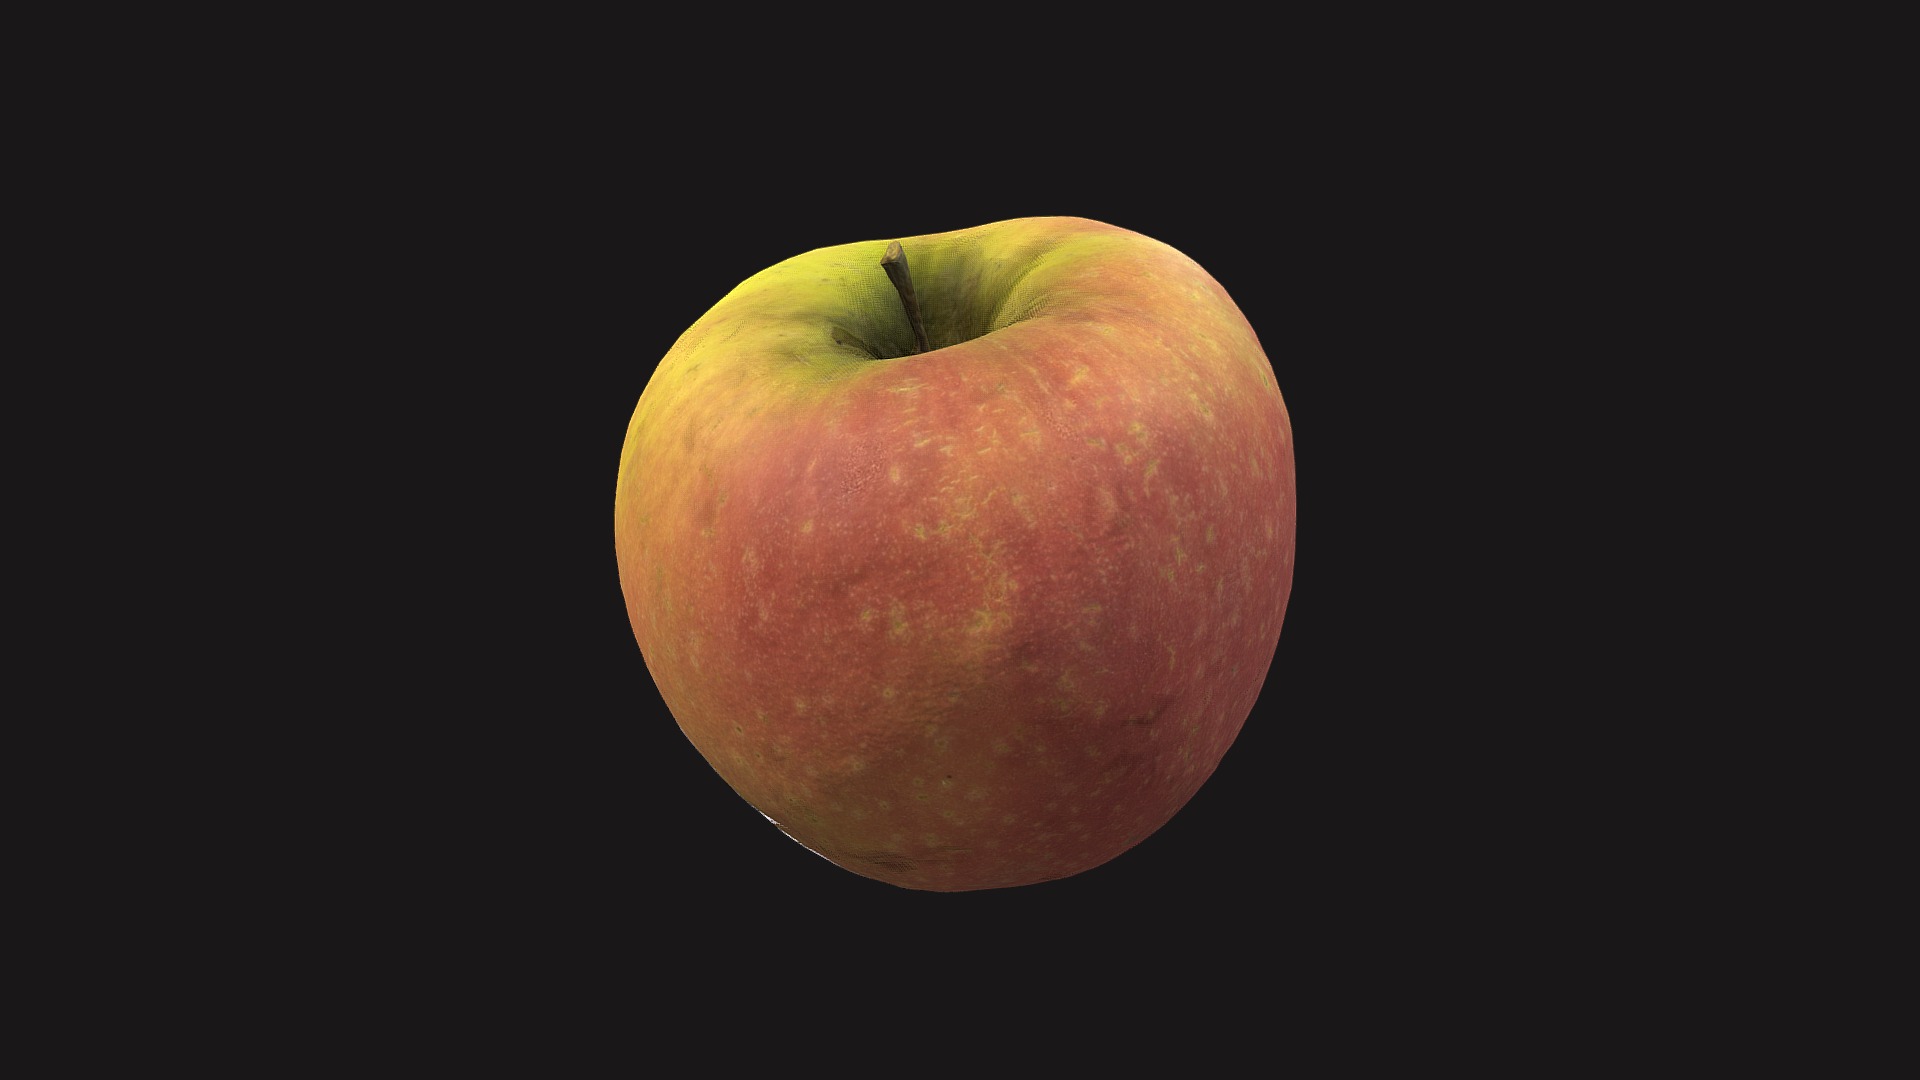 3D model Apple low poly - This is a 3D model of the Apple low poly. The 3D model is about a red apple with a green stem.